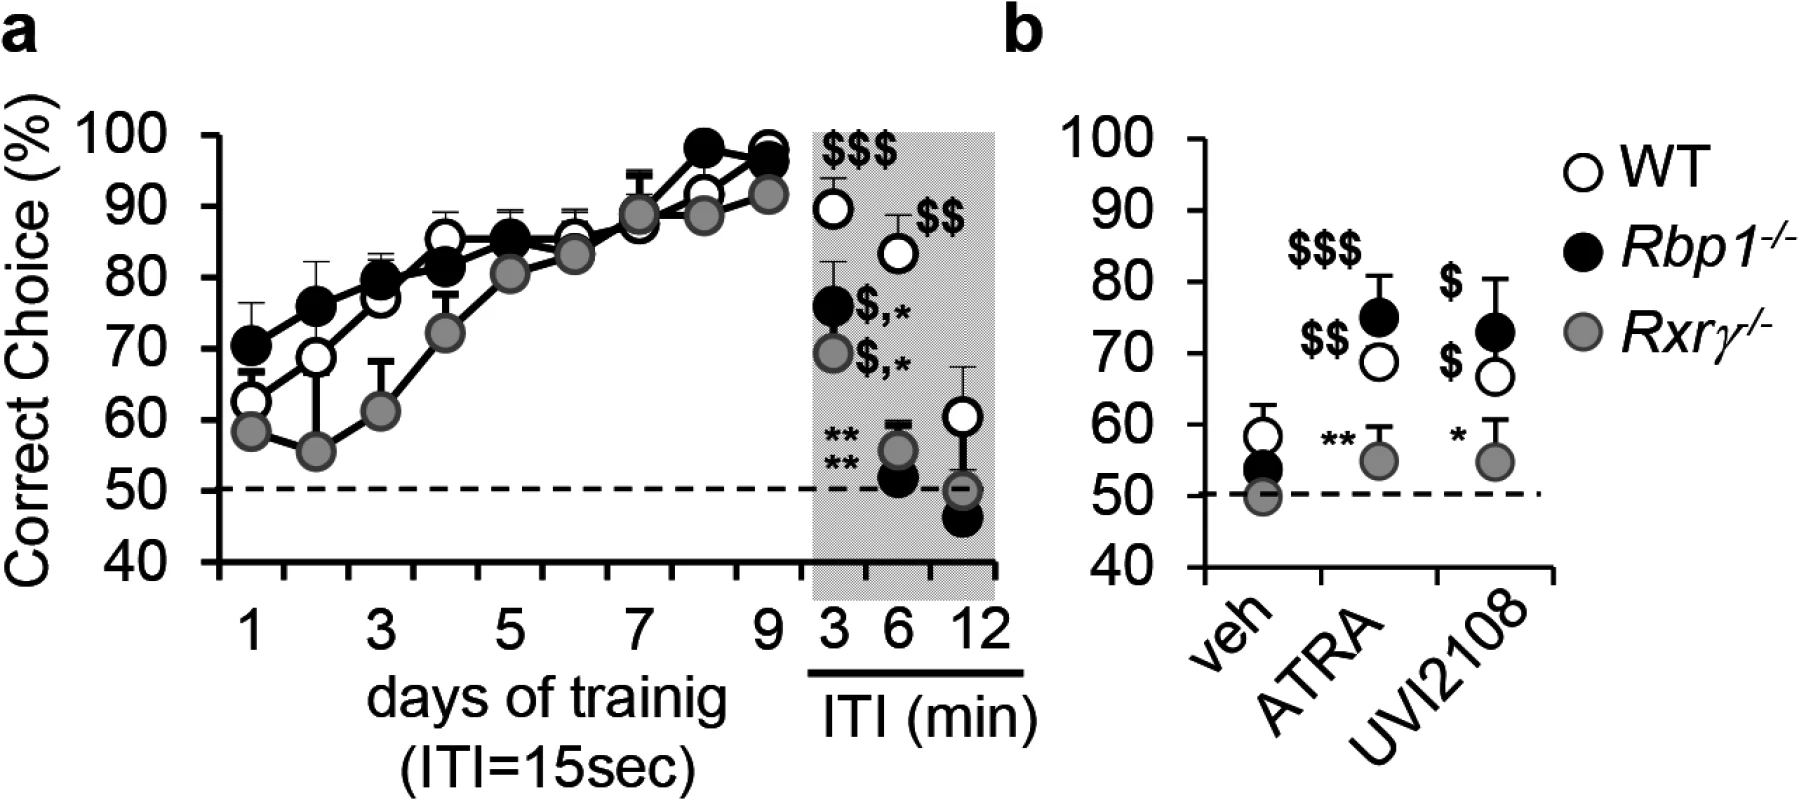 Compromised RXR signaling in <i>Rbp1</i><sup><i>-/-</i></sup> mice.